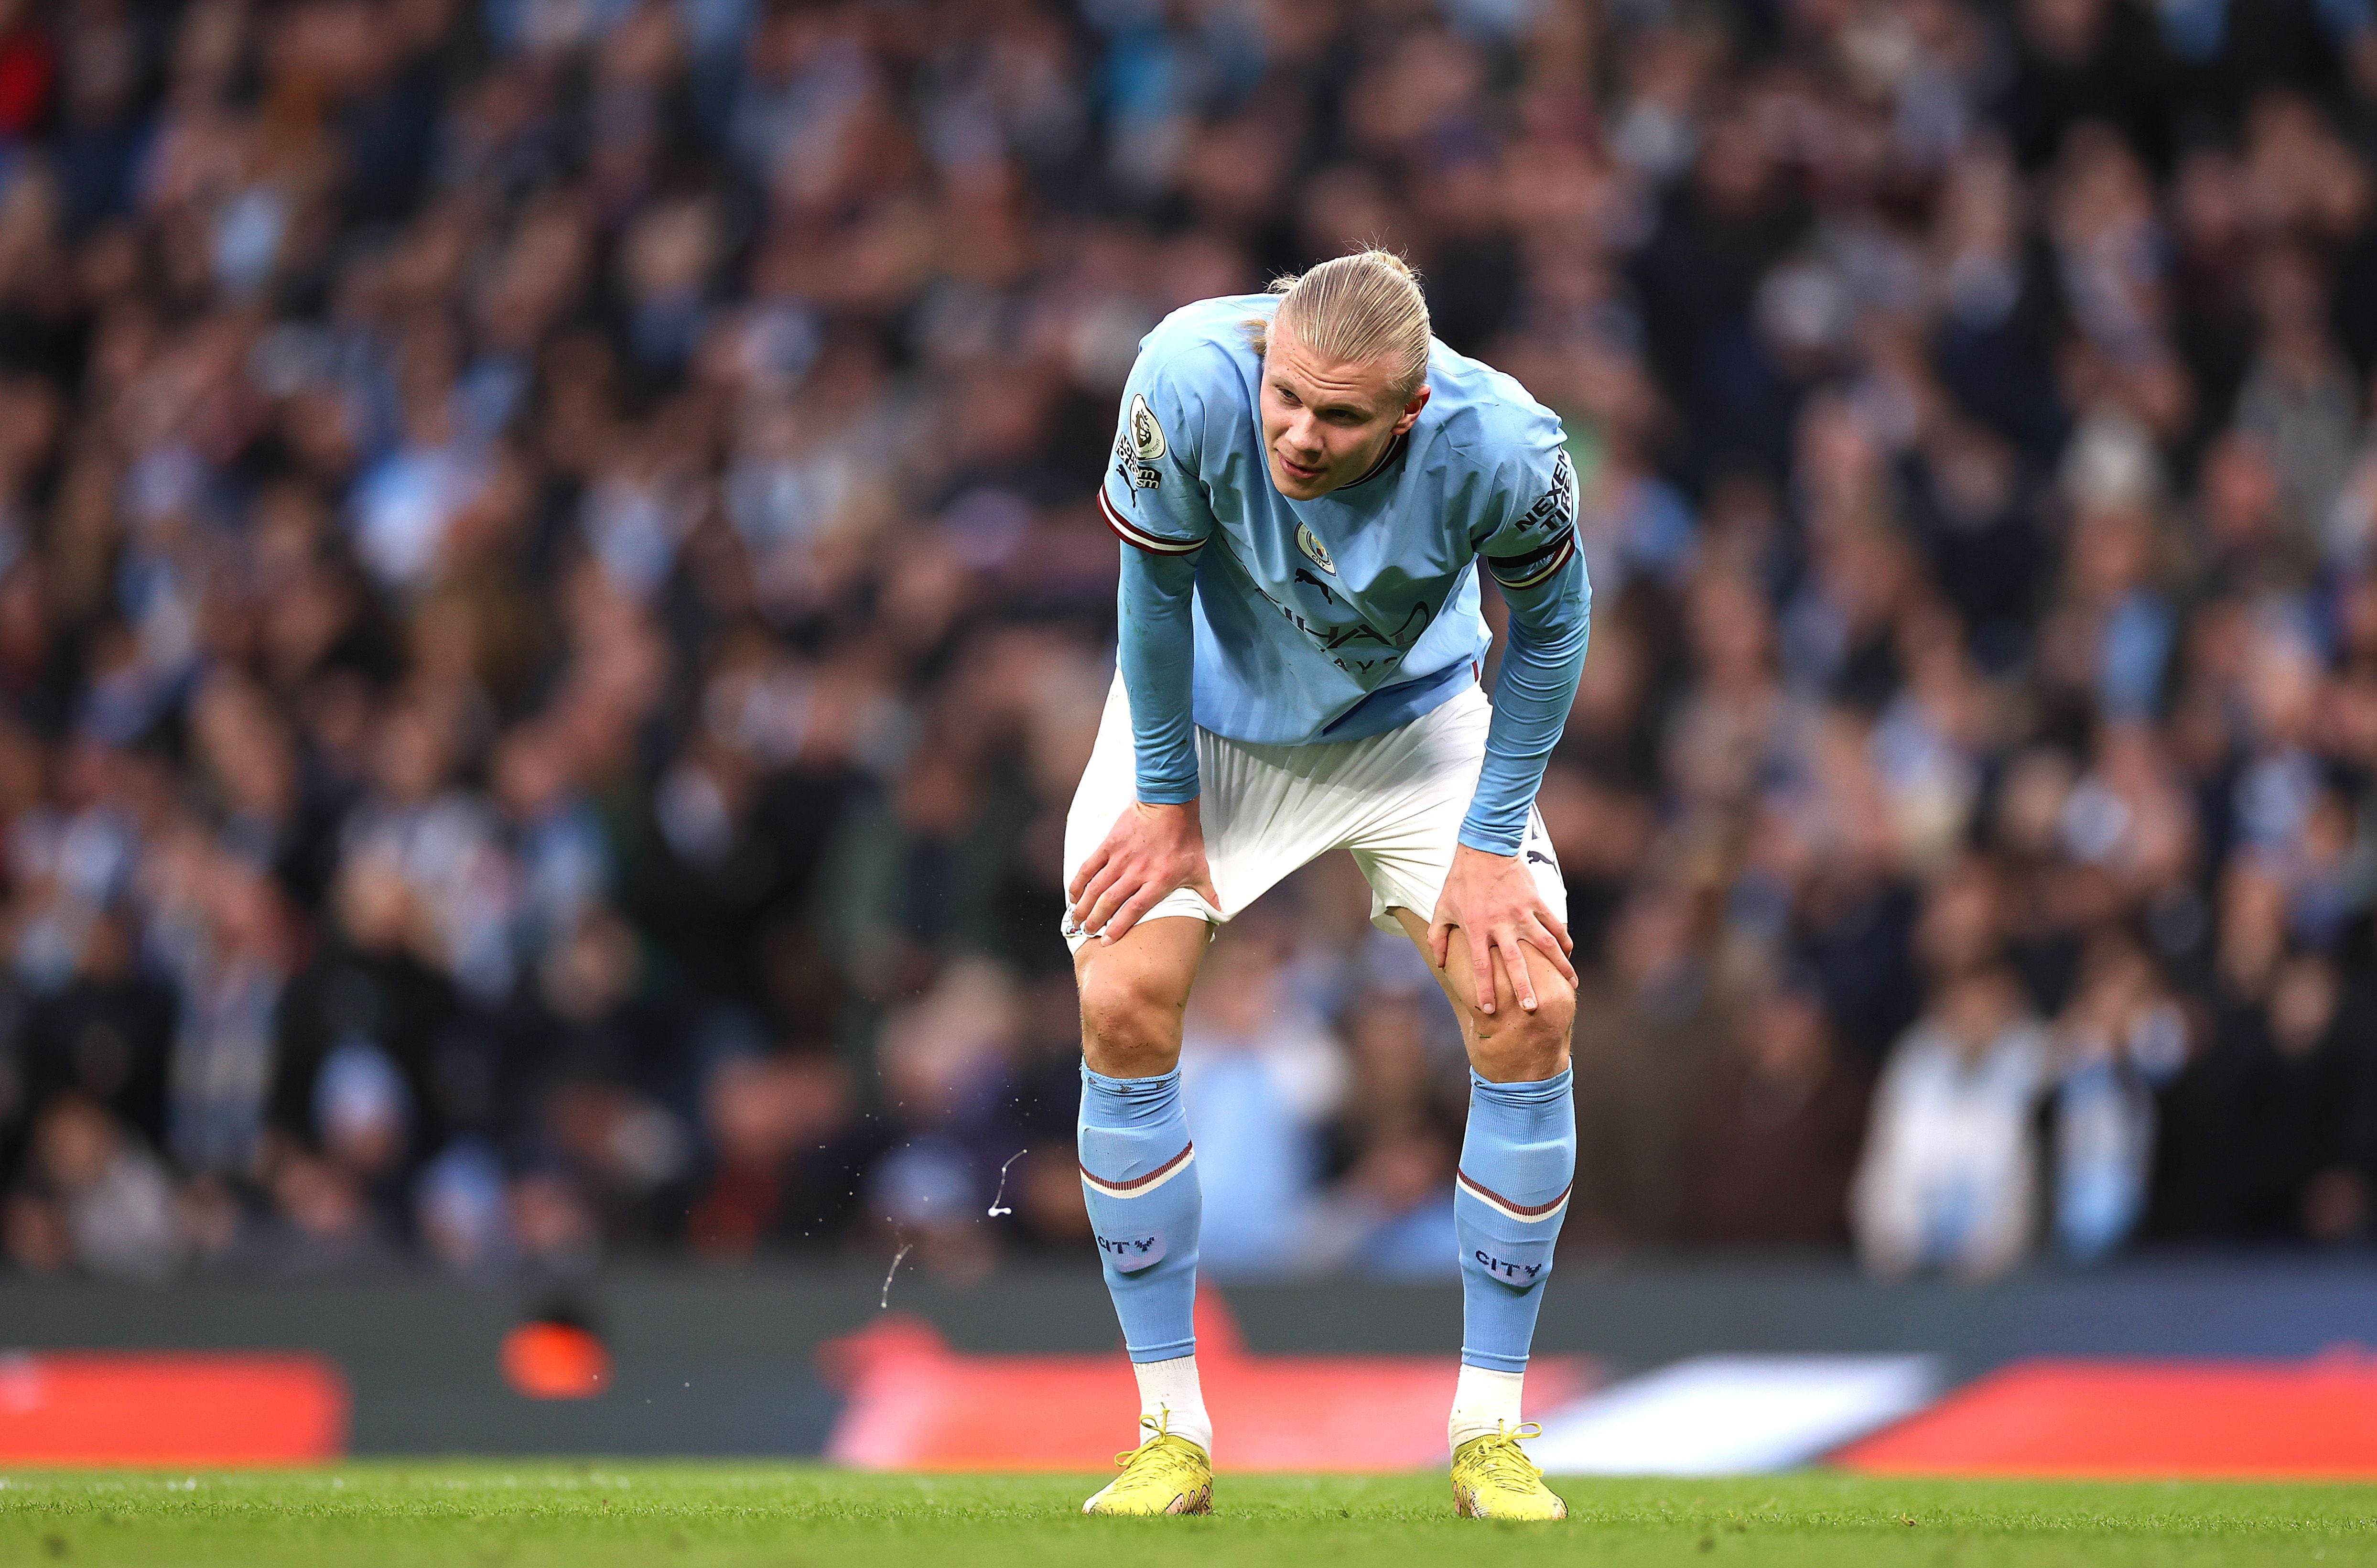 MANCHESTER, ENGLAND - FEBRUARY 12:  Erling Haaland of Manchester City reacts during the Premier League match between Manchester City and Aston Villa at Etihad Stadium on February 12, 2023 in Manchester, England. (Photo by Ryan Pierse/Getty Images) LESION
PUBLICADA 15/02/23 NA MA18 1COL